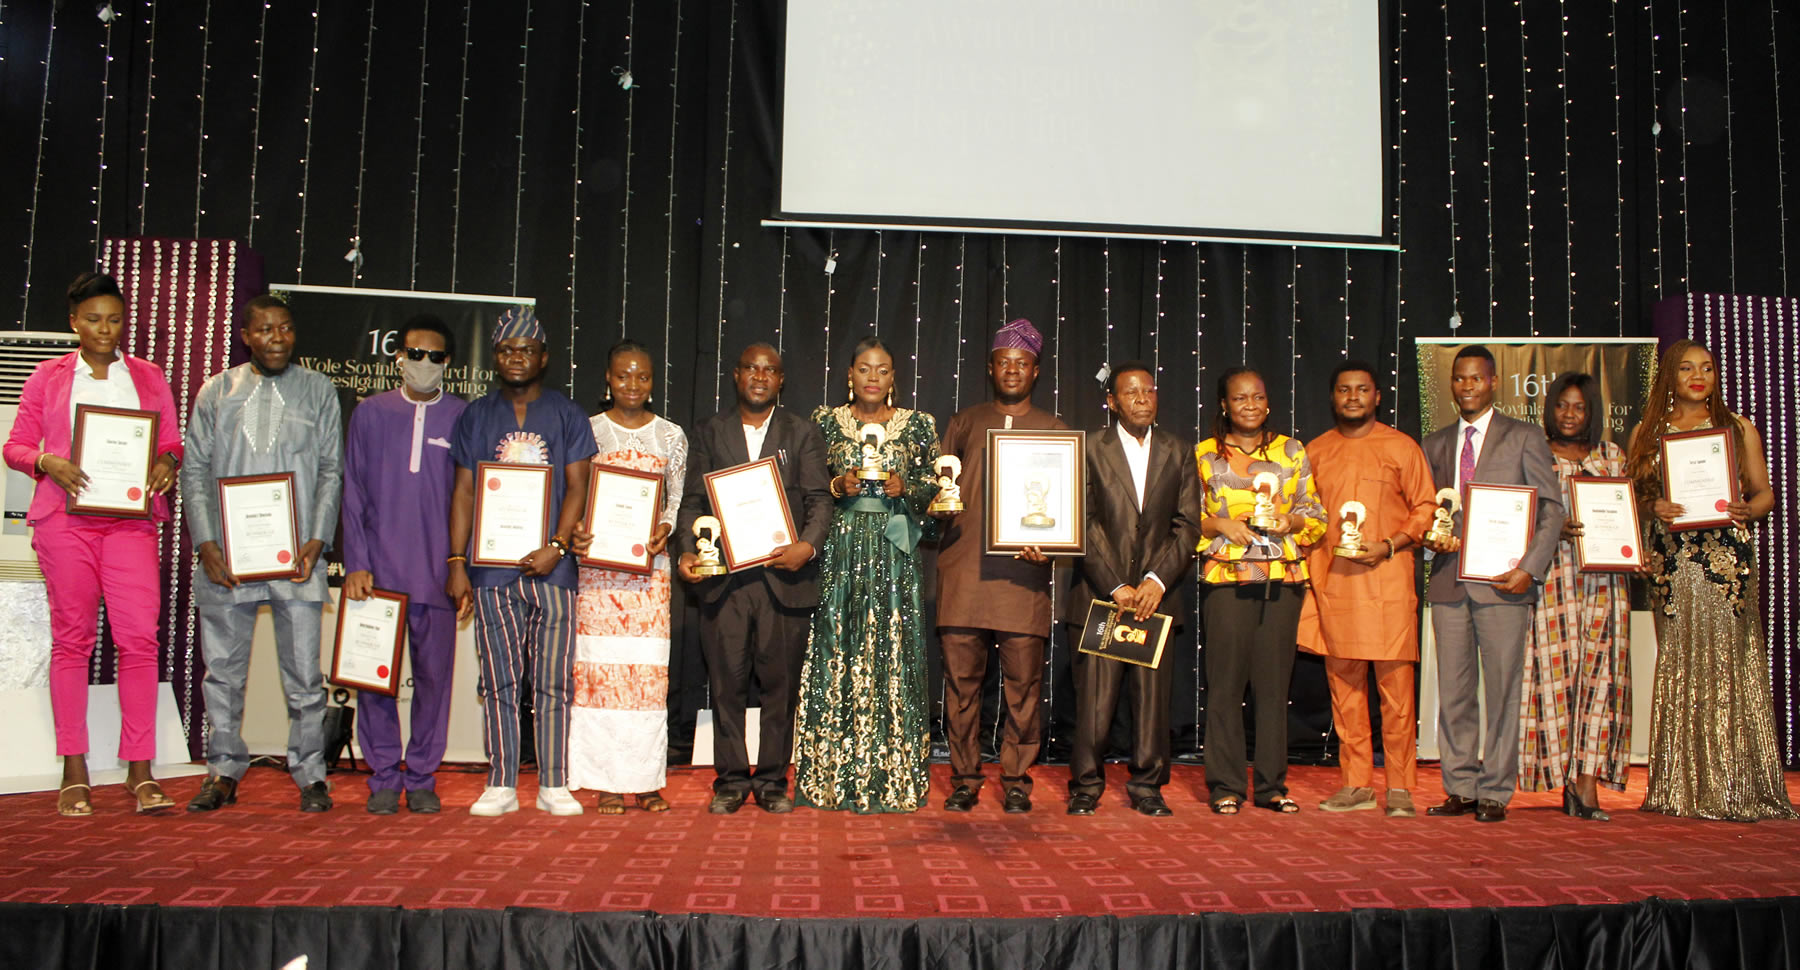 Group photograph of finalists and honorary award recipients at the 16th Wole Soyinka Award for Investigative Reporting at NECA House, Lagos on Thursday, 9th December 2021